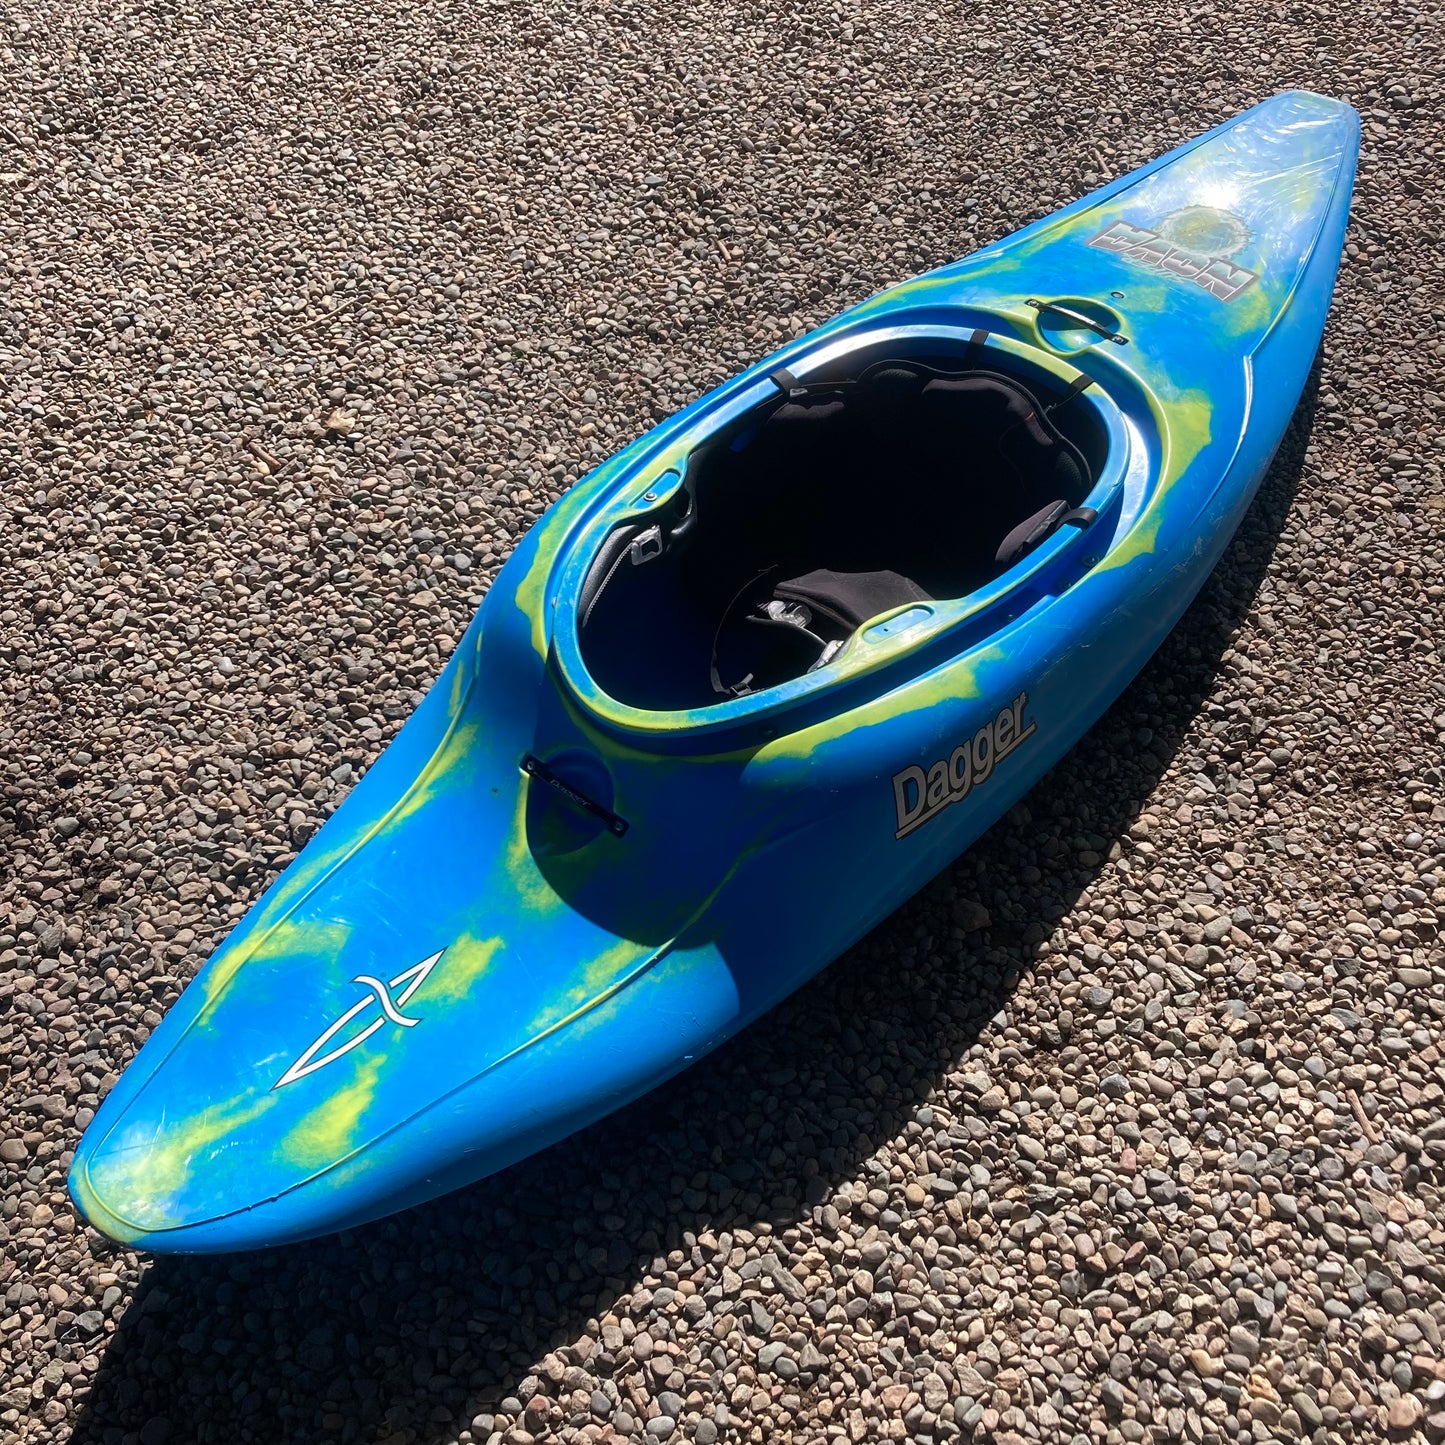 A blue and yellow Demo Supernova kayak laying on the ground, made by Dagger.